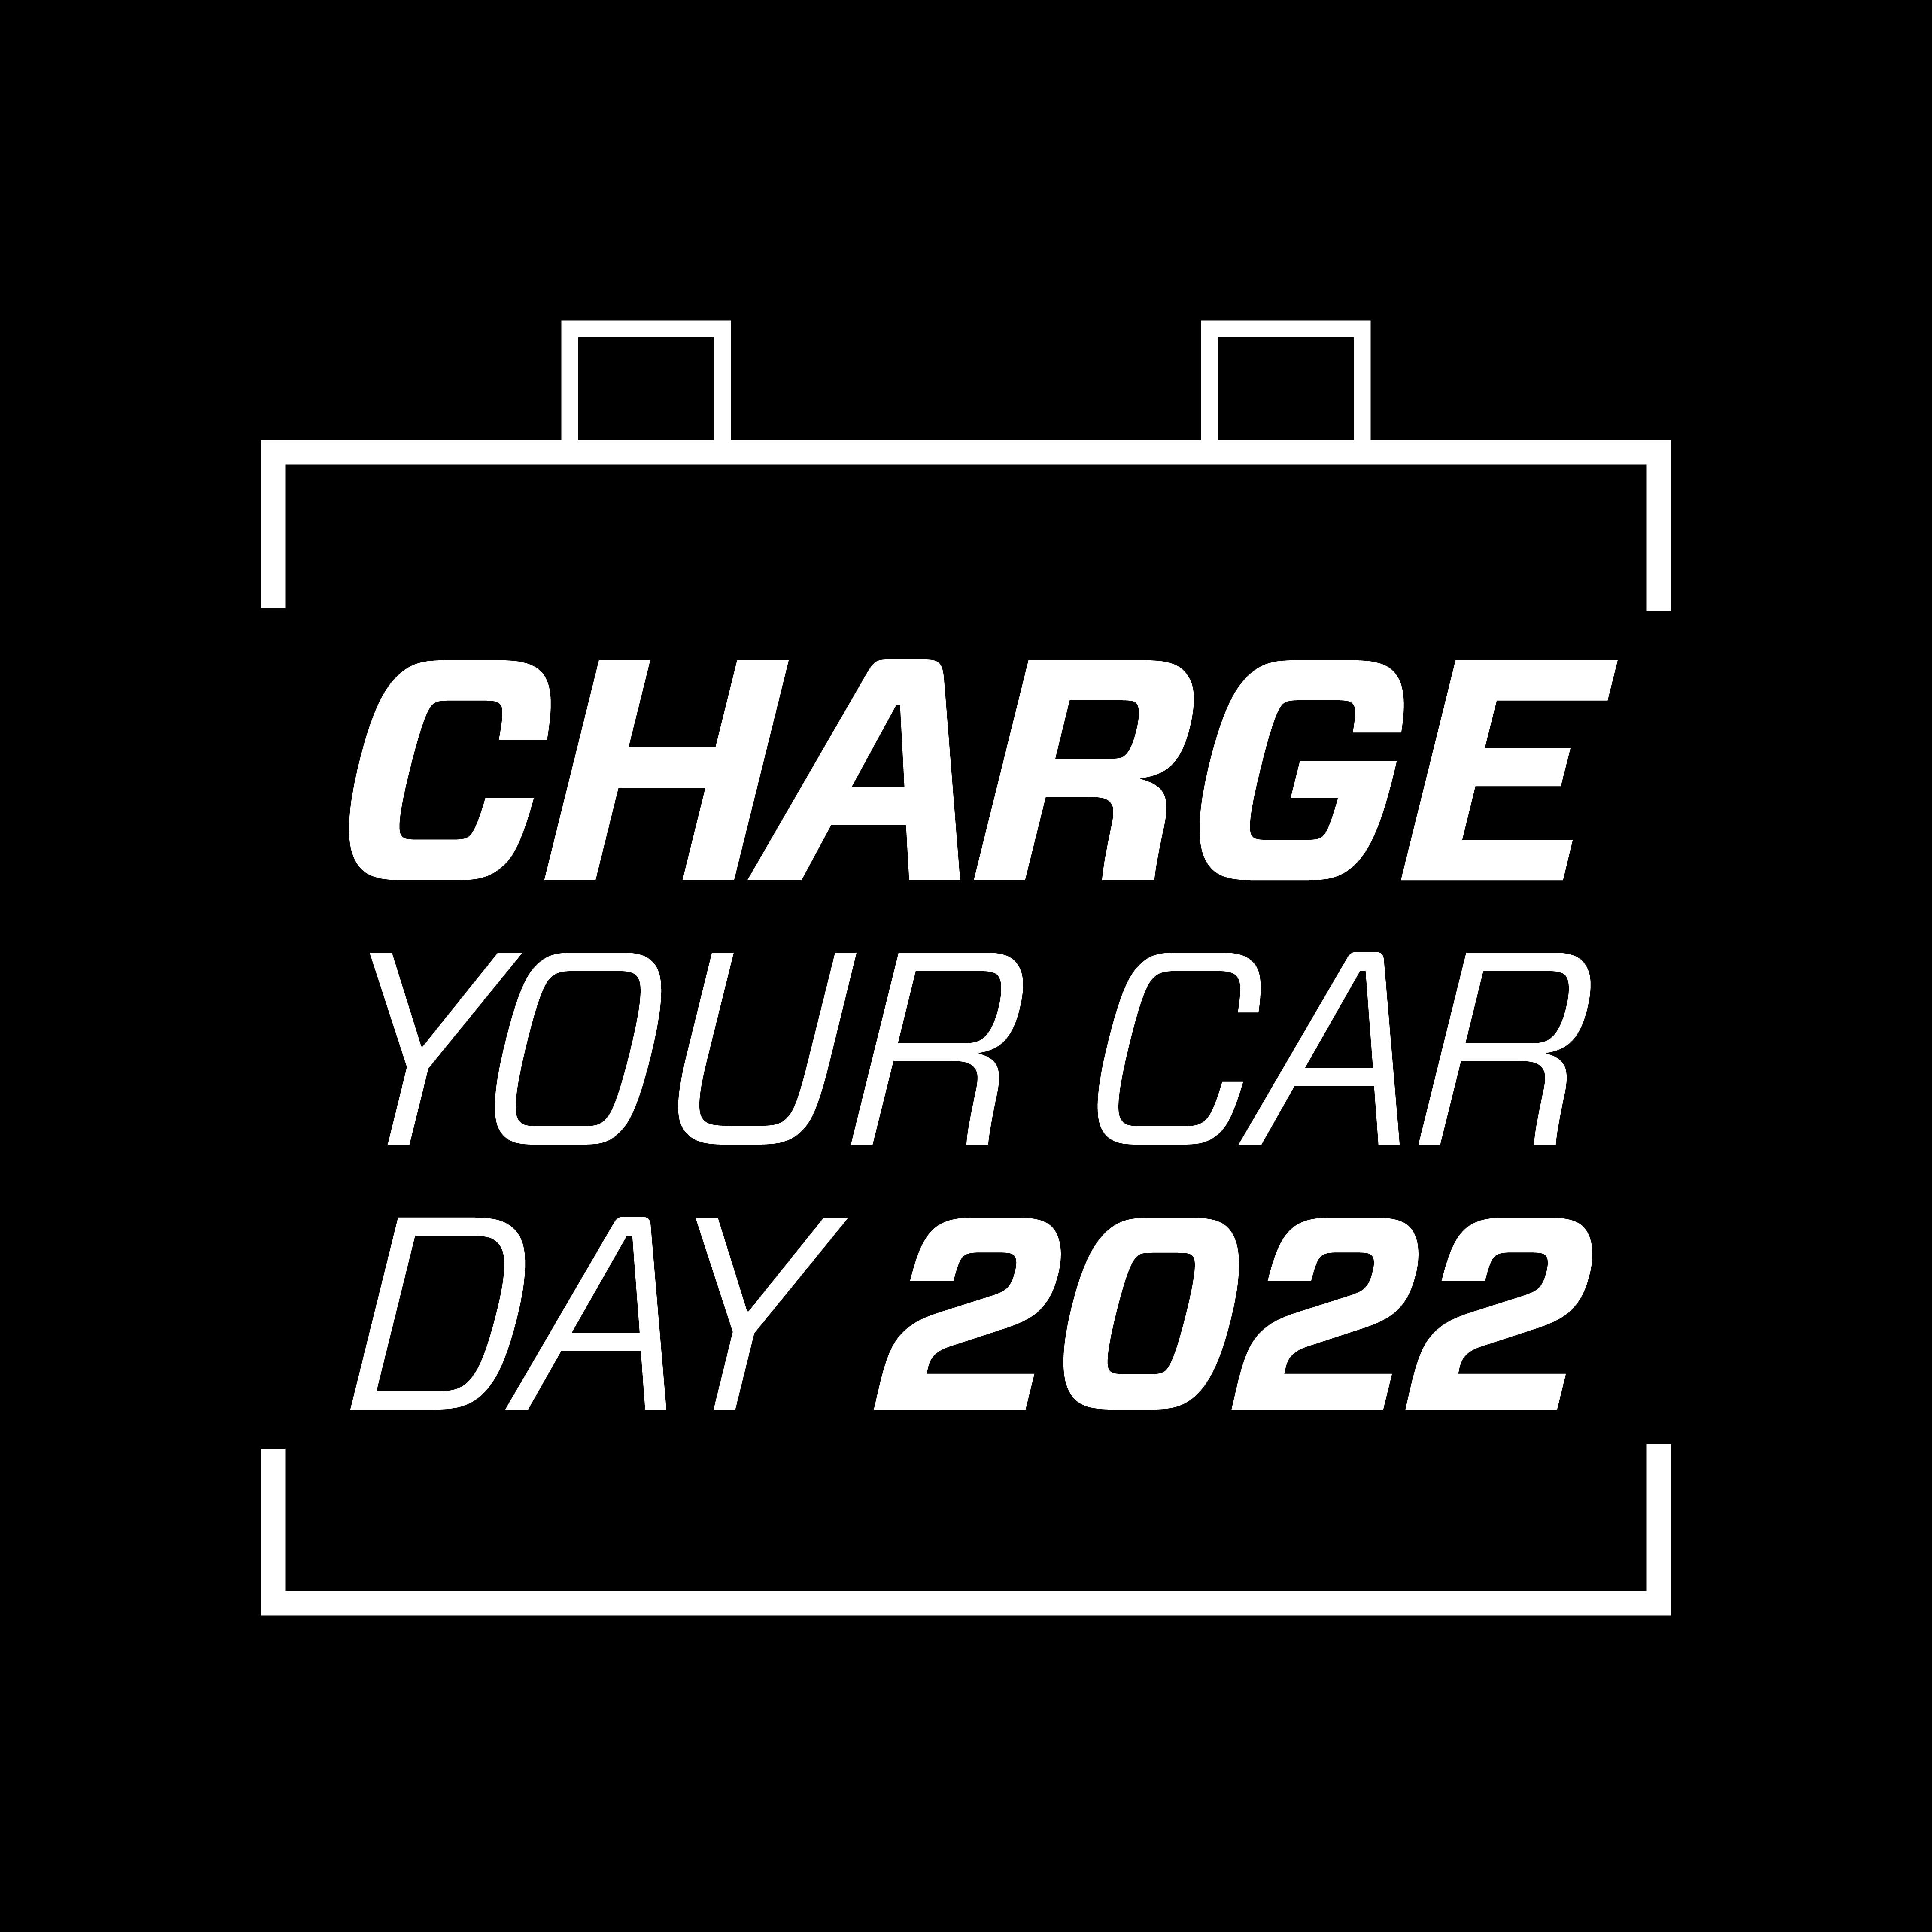 Charge_your_car_day_2022_logo.png